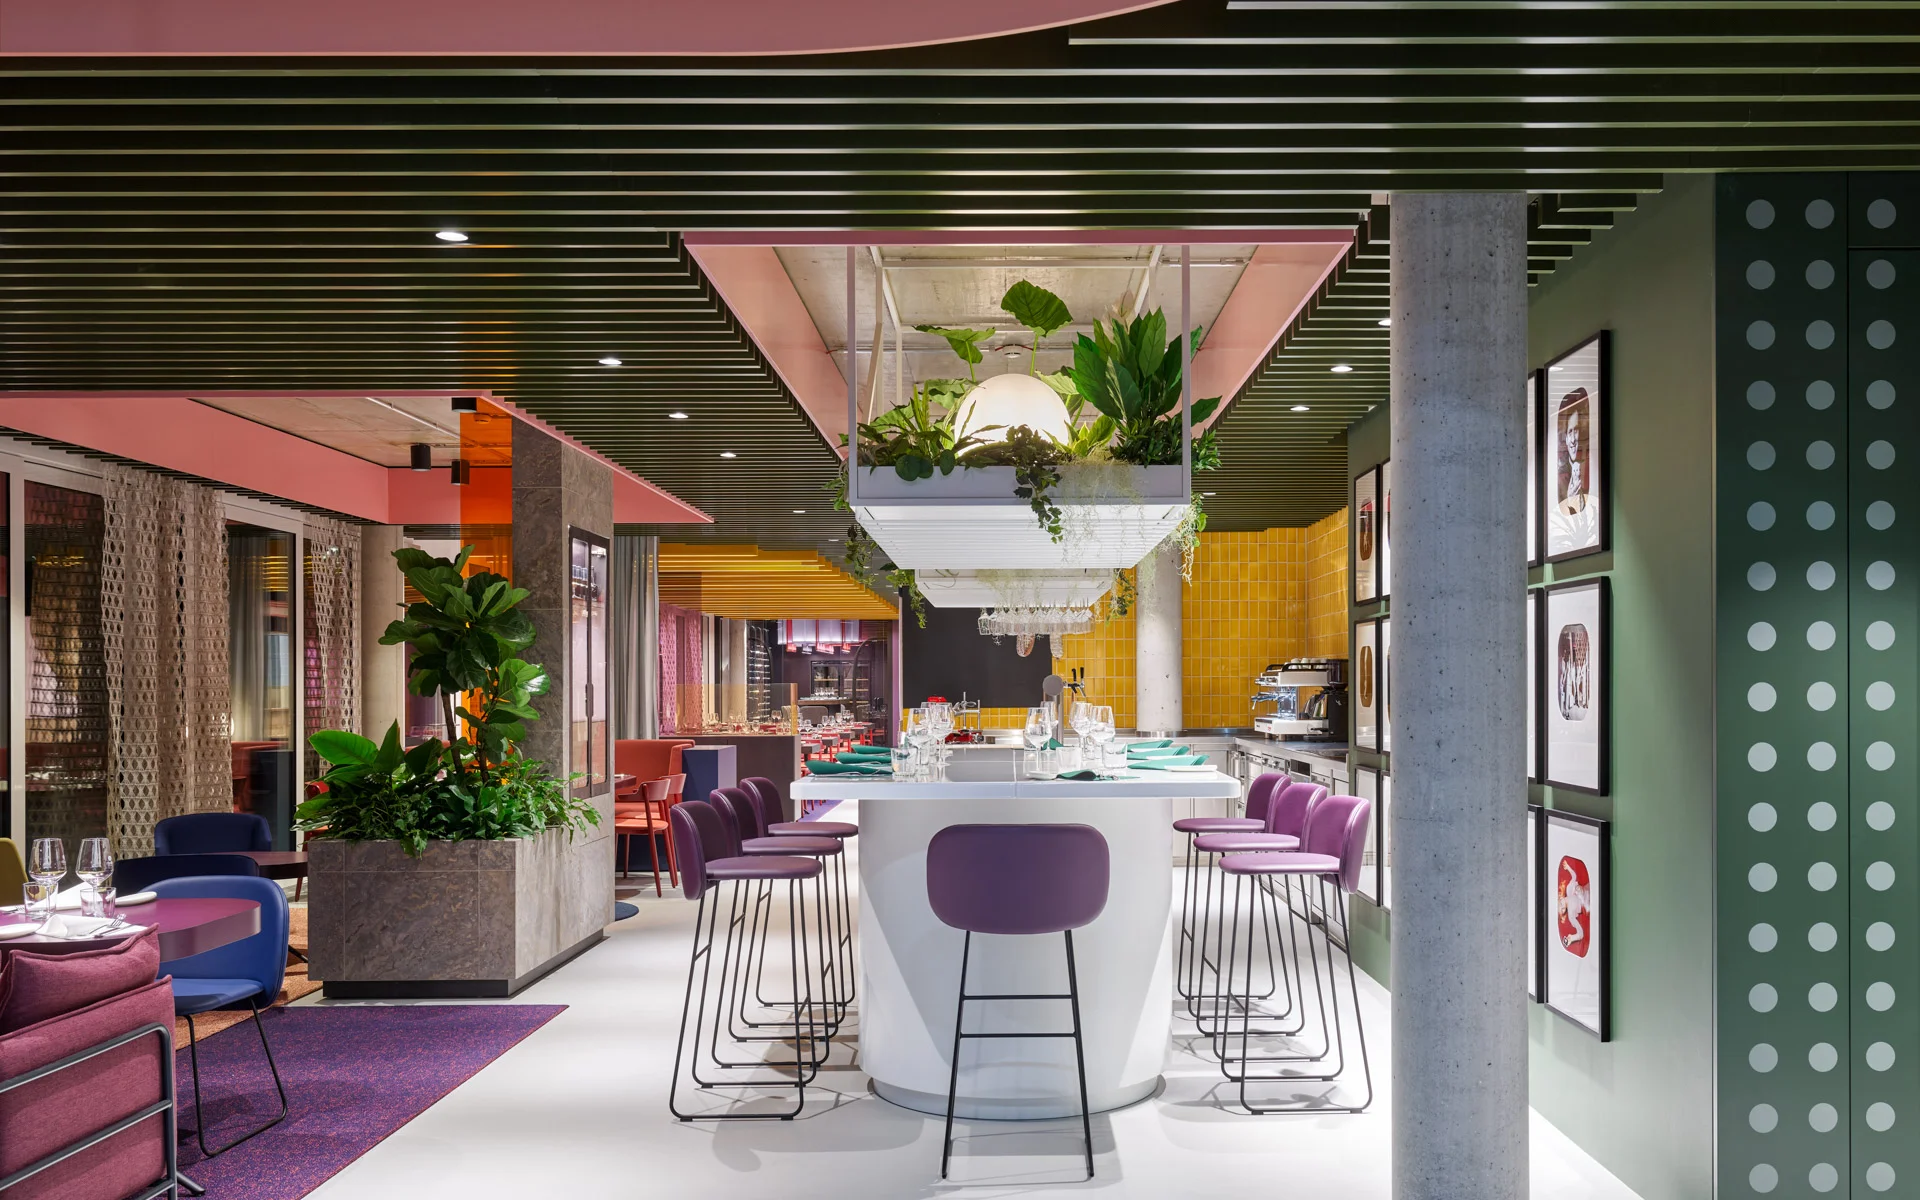 A restaurant color blocks using a wide range of colors to designate seating areas